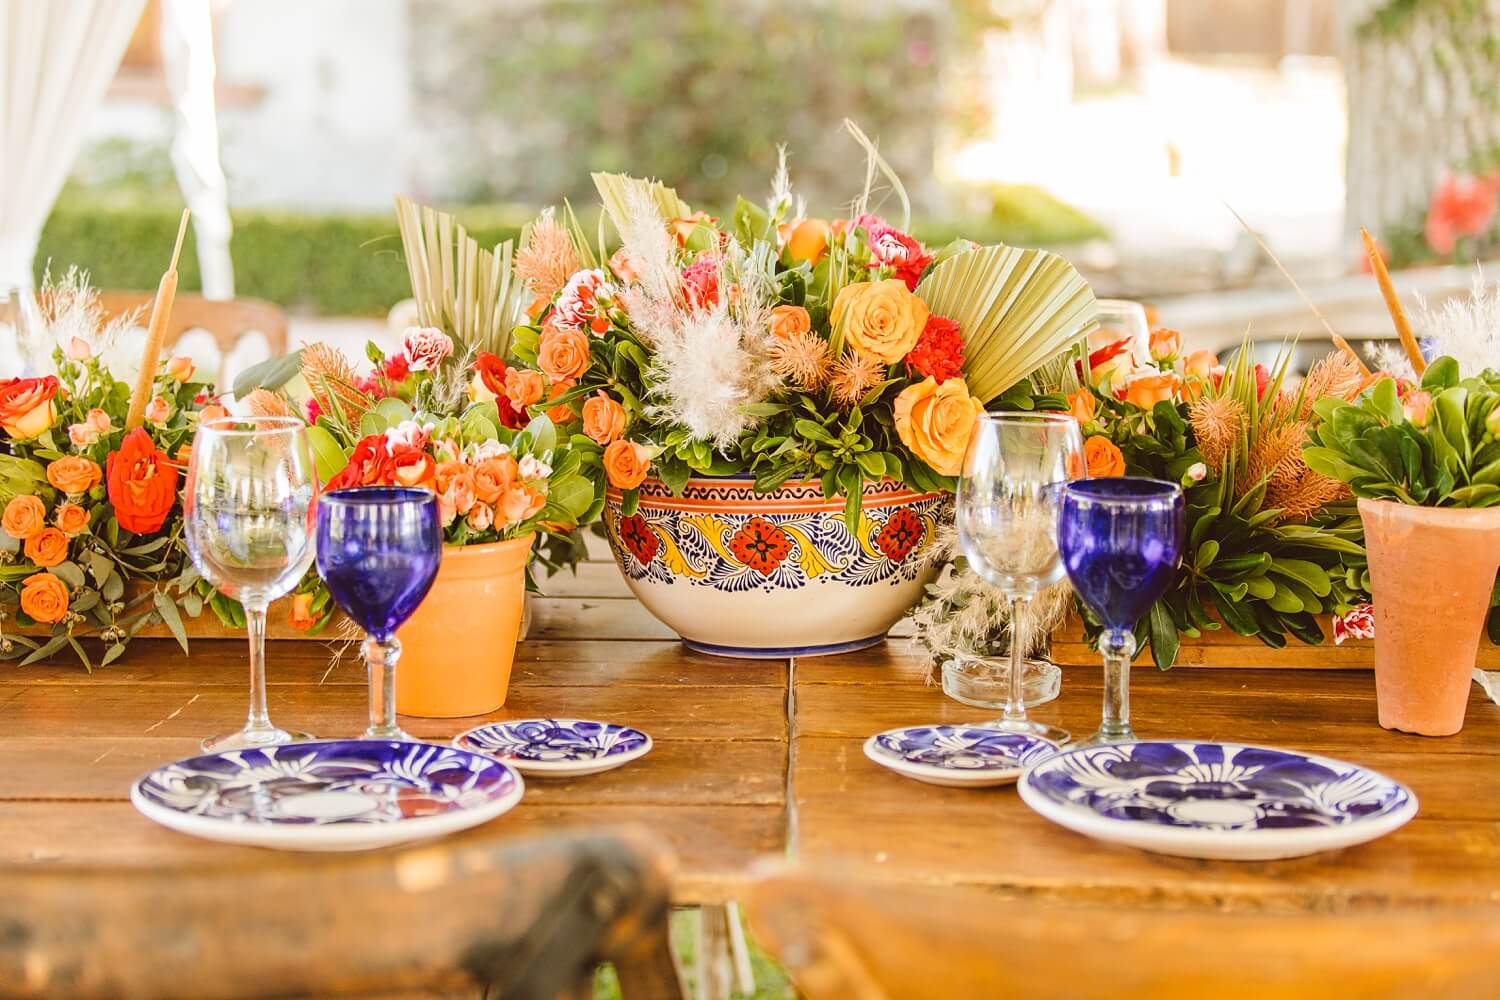 Colorful flowers in painted bowl with blue cups and talavera plates | Brooke Michelle Photo